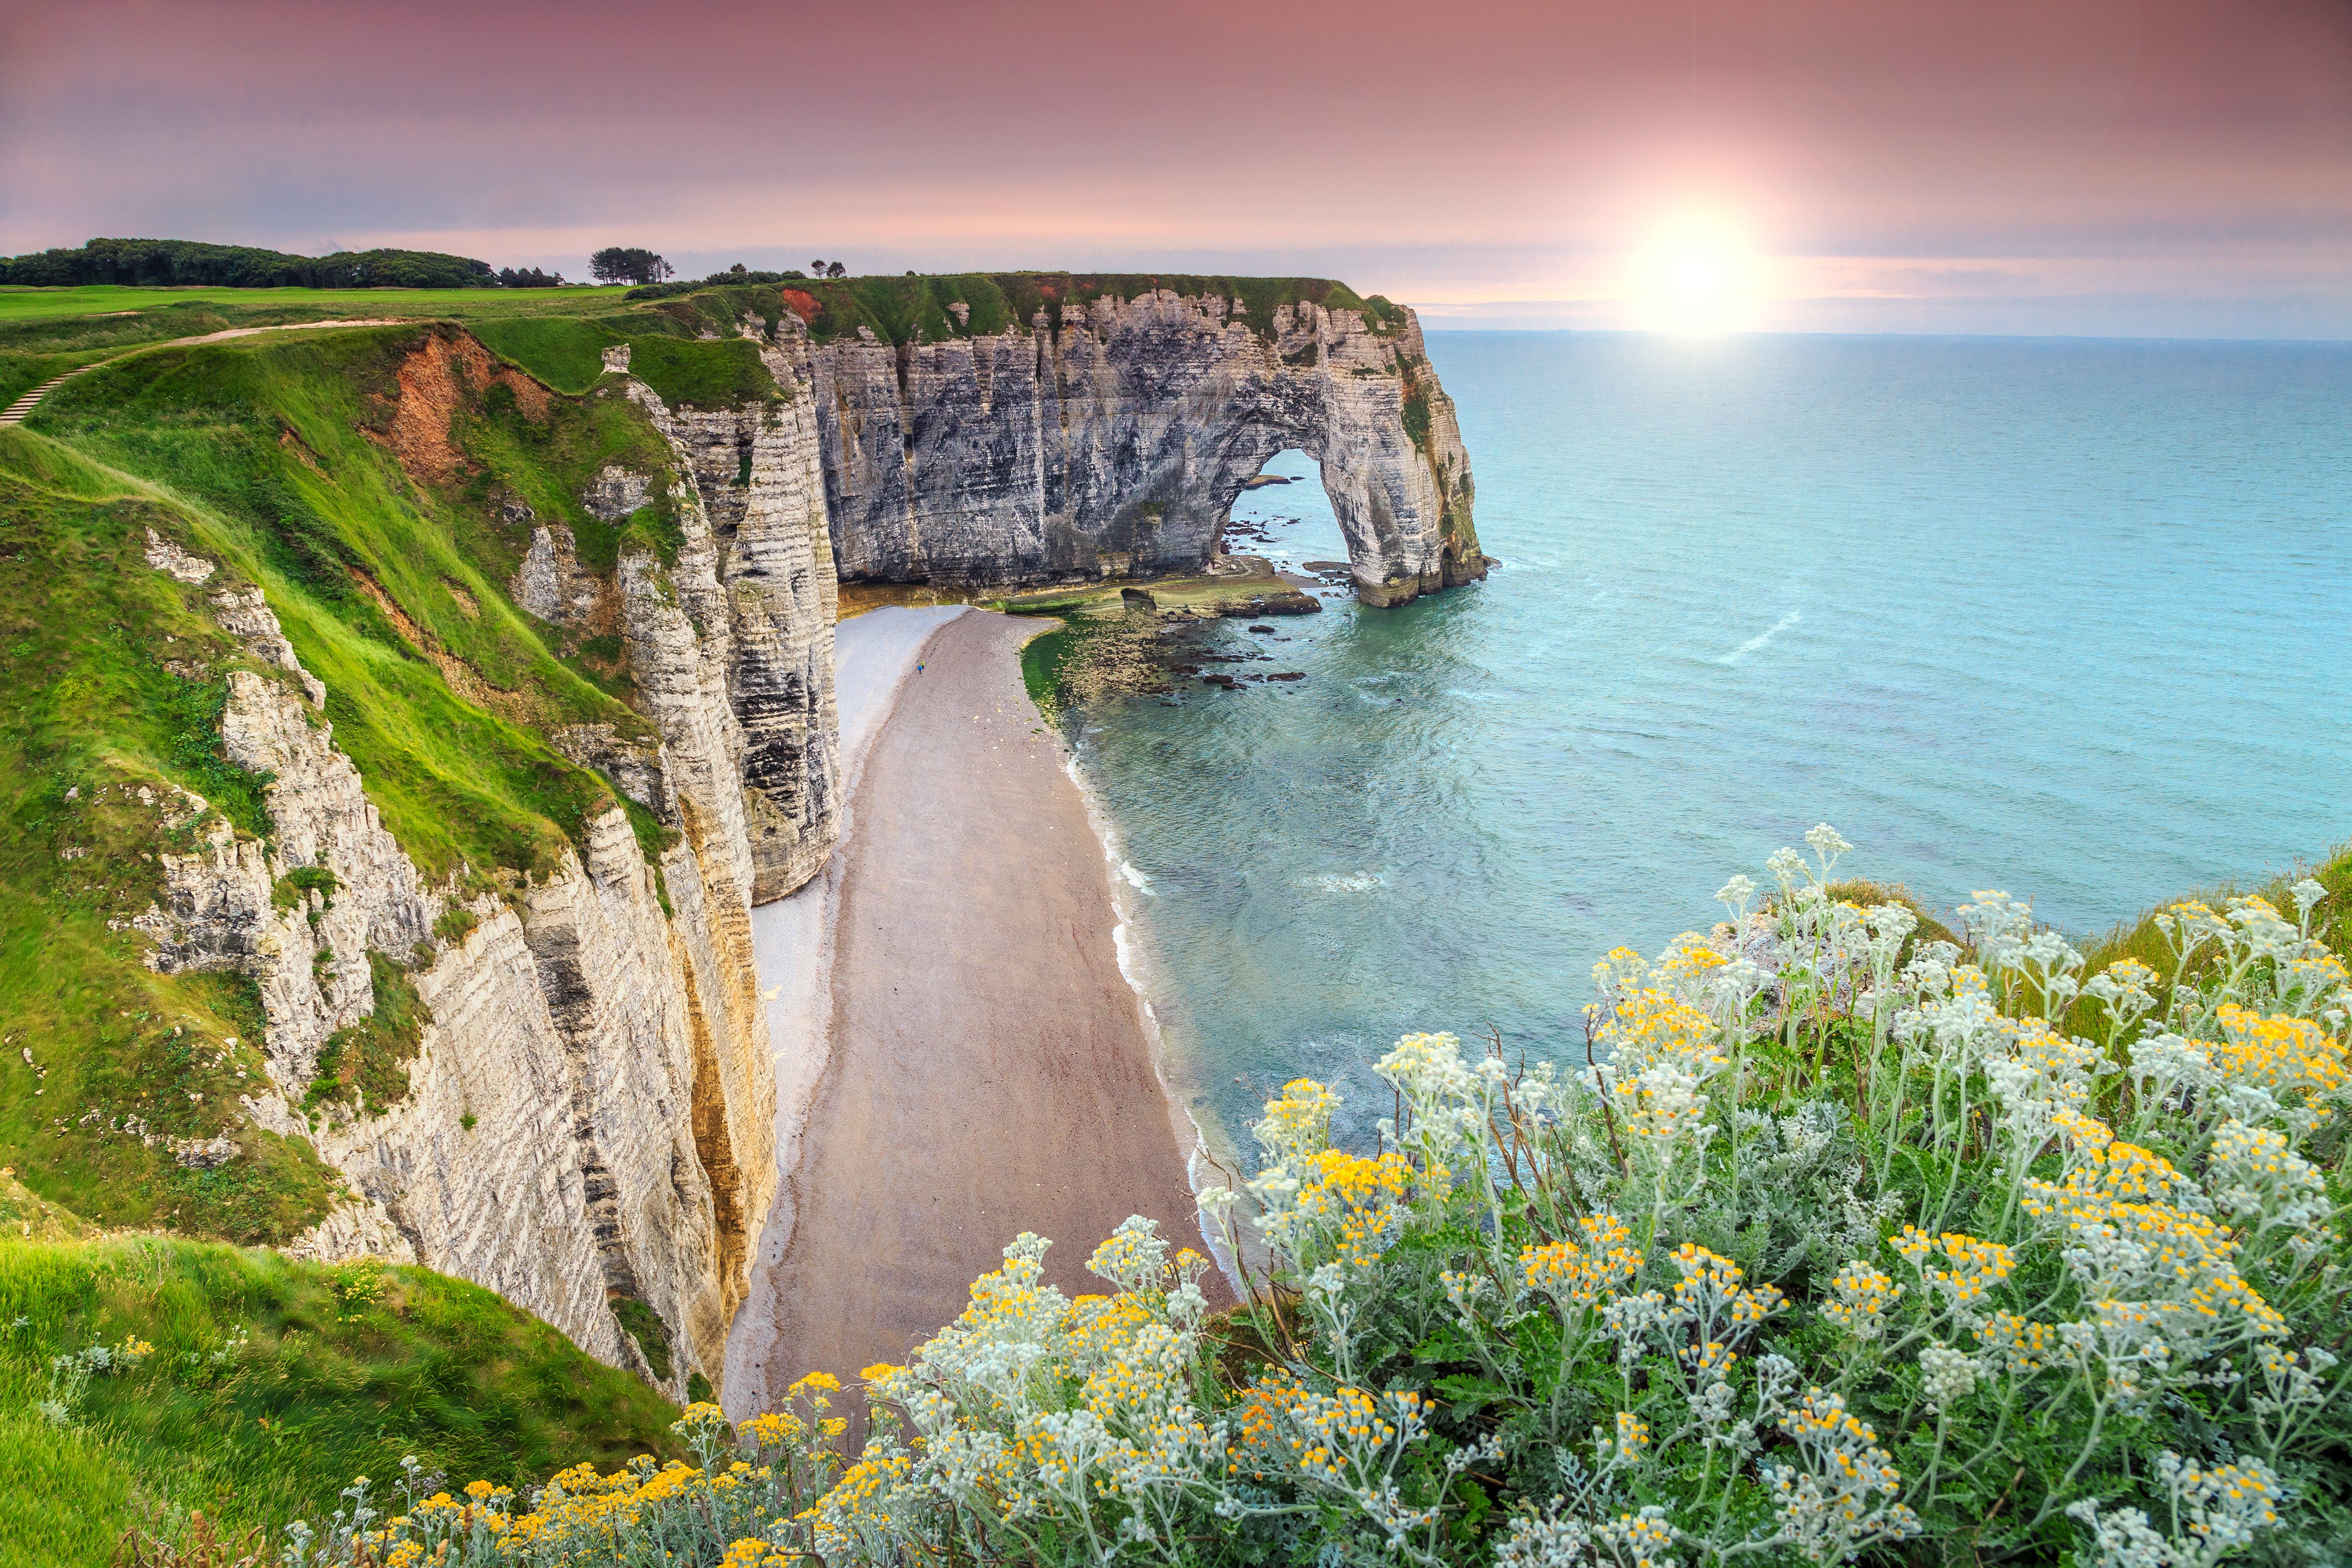 The cliffs of Etretat in Normandy, France.